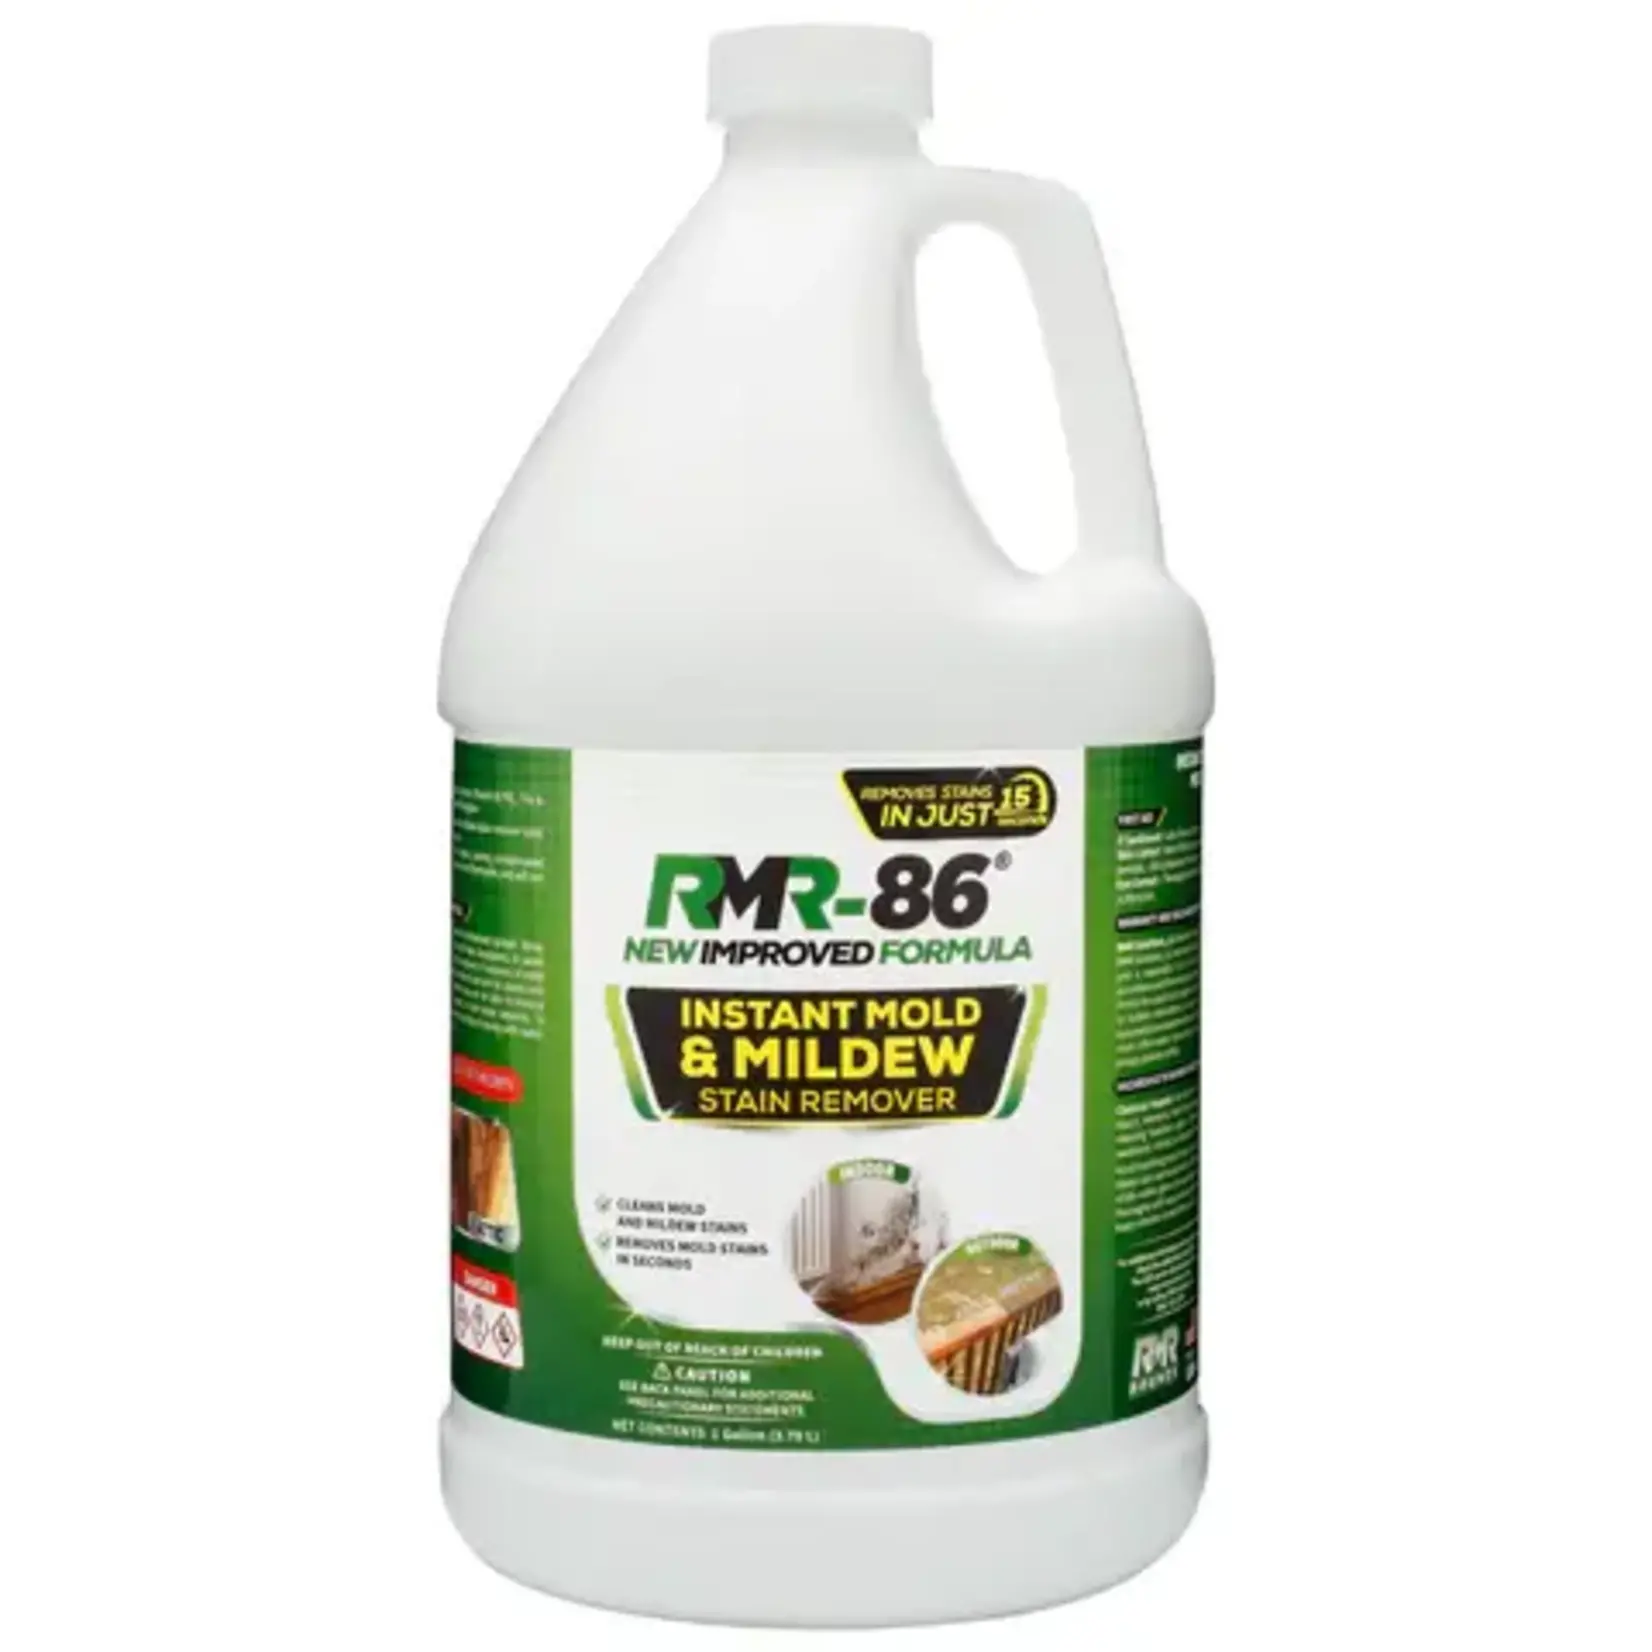 RMR-86 Instant Mold & Mildew Stain Remover - 1 Gal.